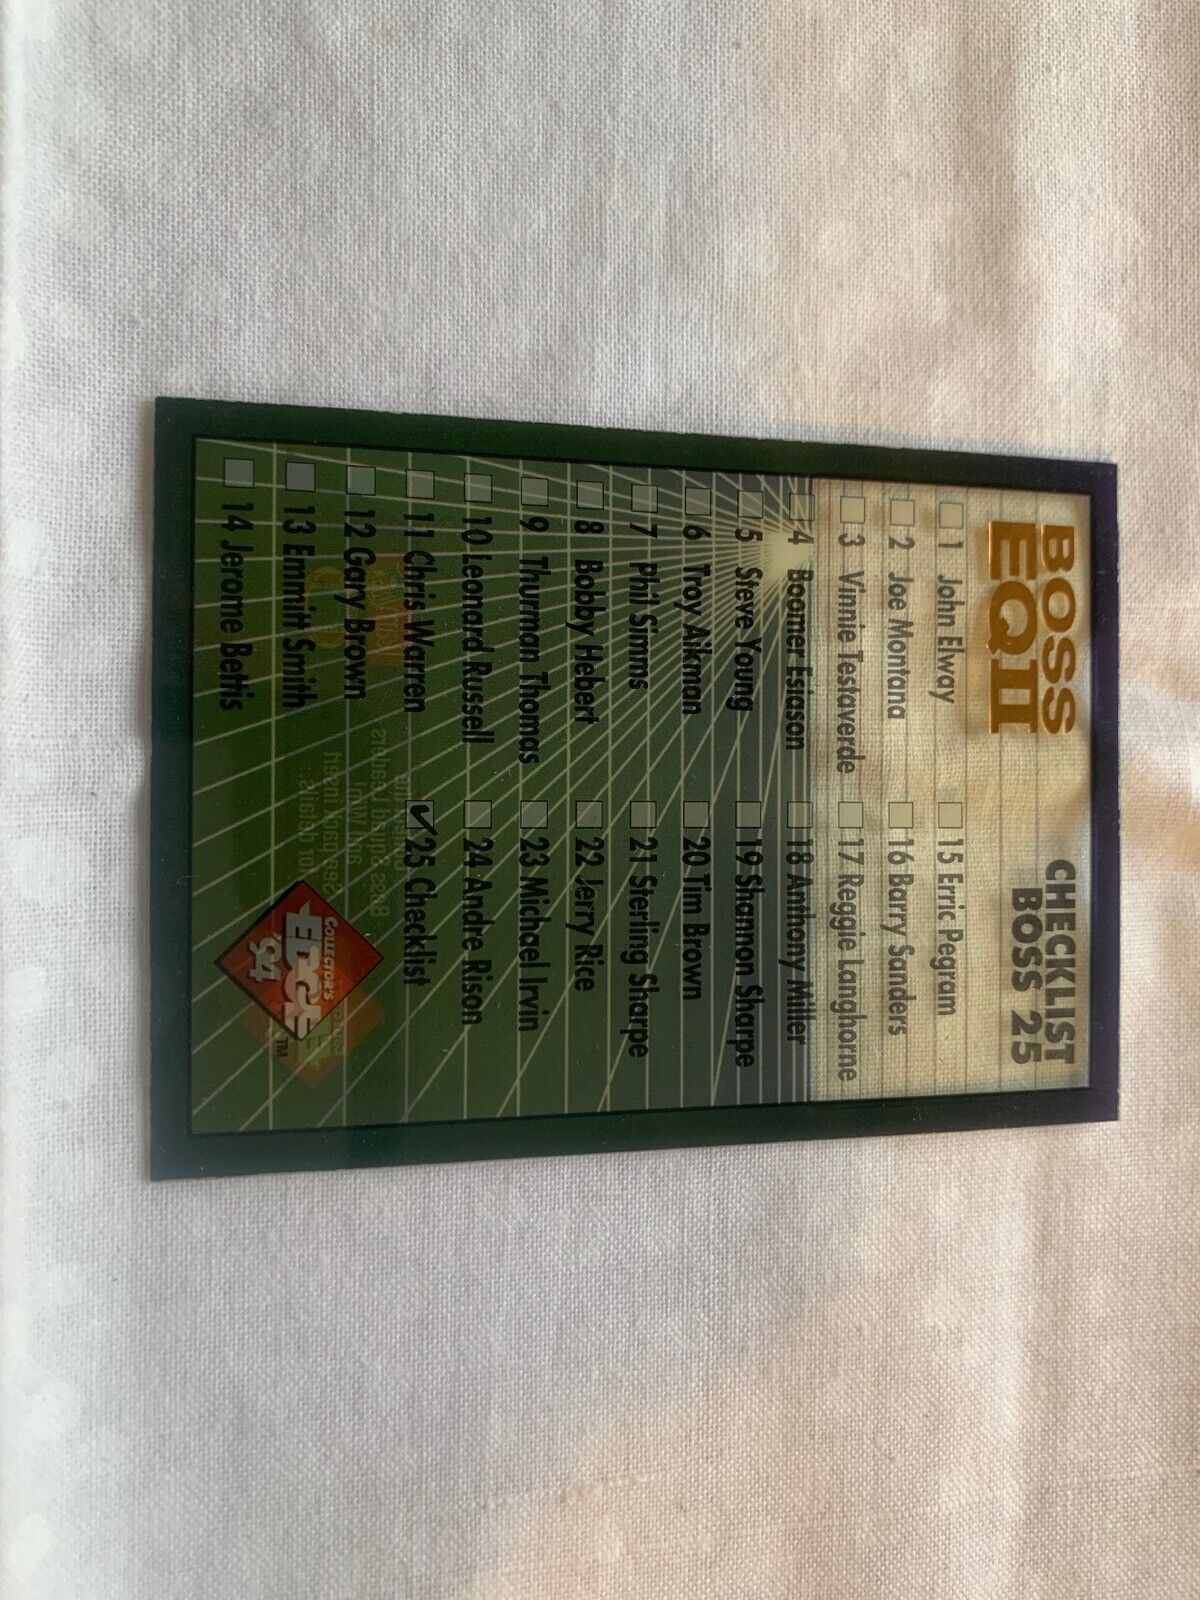 1994 Edge Boss EQII Football Card Set featuring 25 Cards with Favre and Emmitt